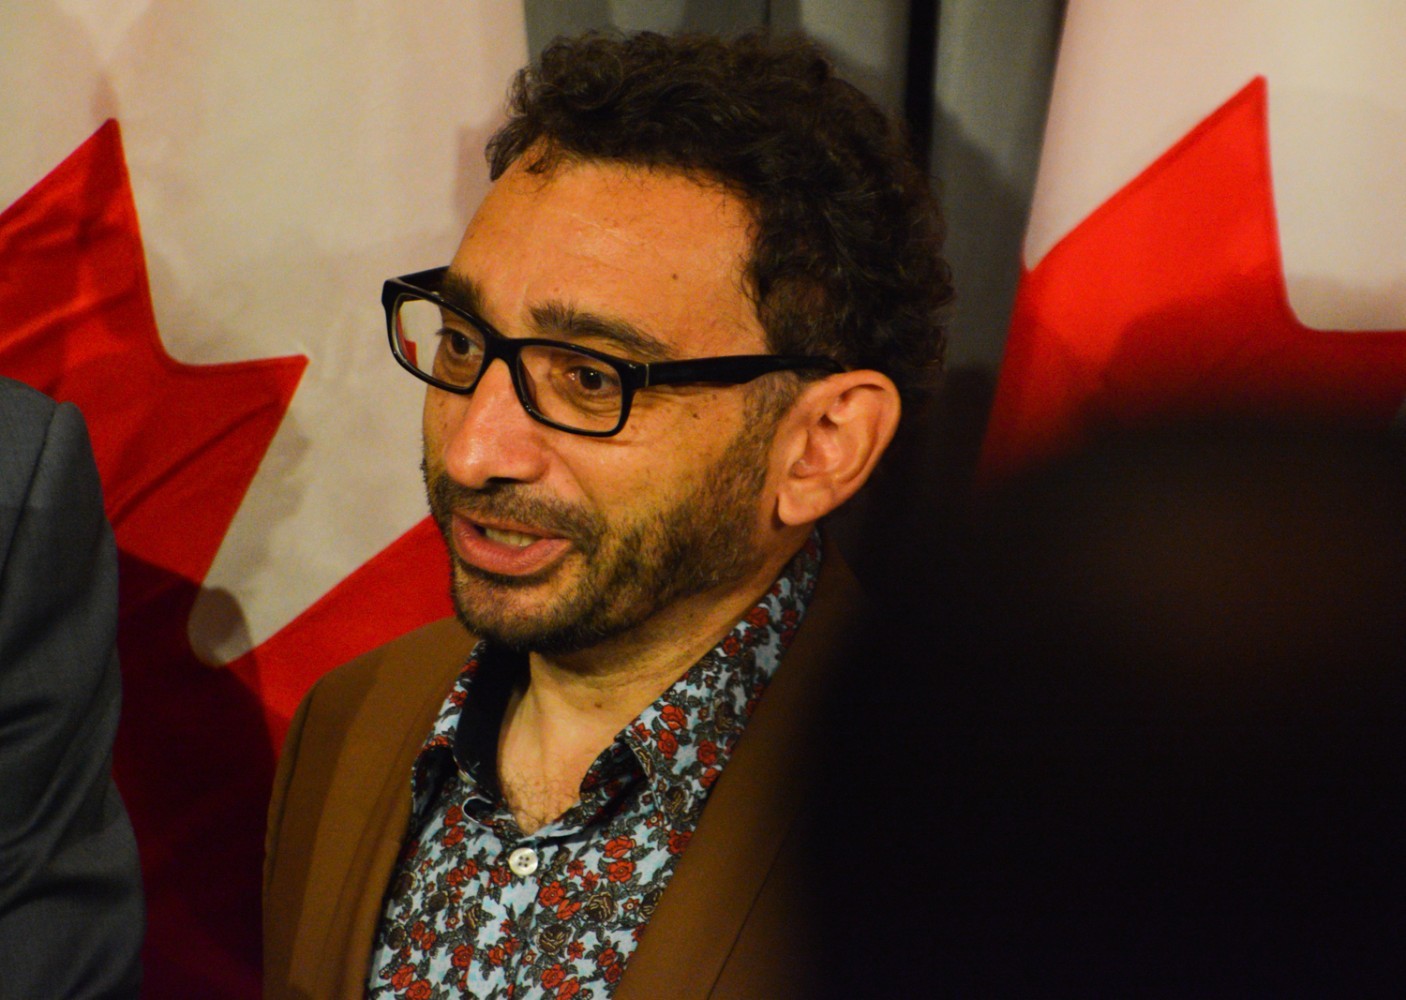 Omar Alghabra’s advocacy takes place behind the scenes